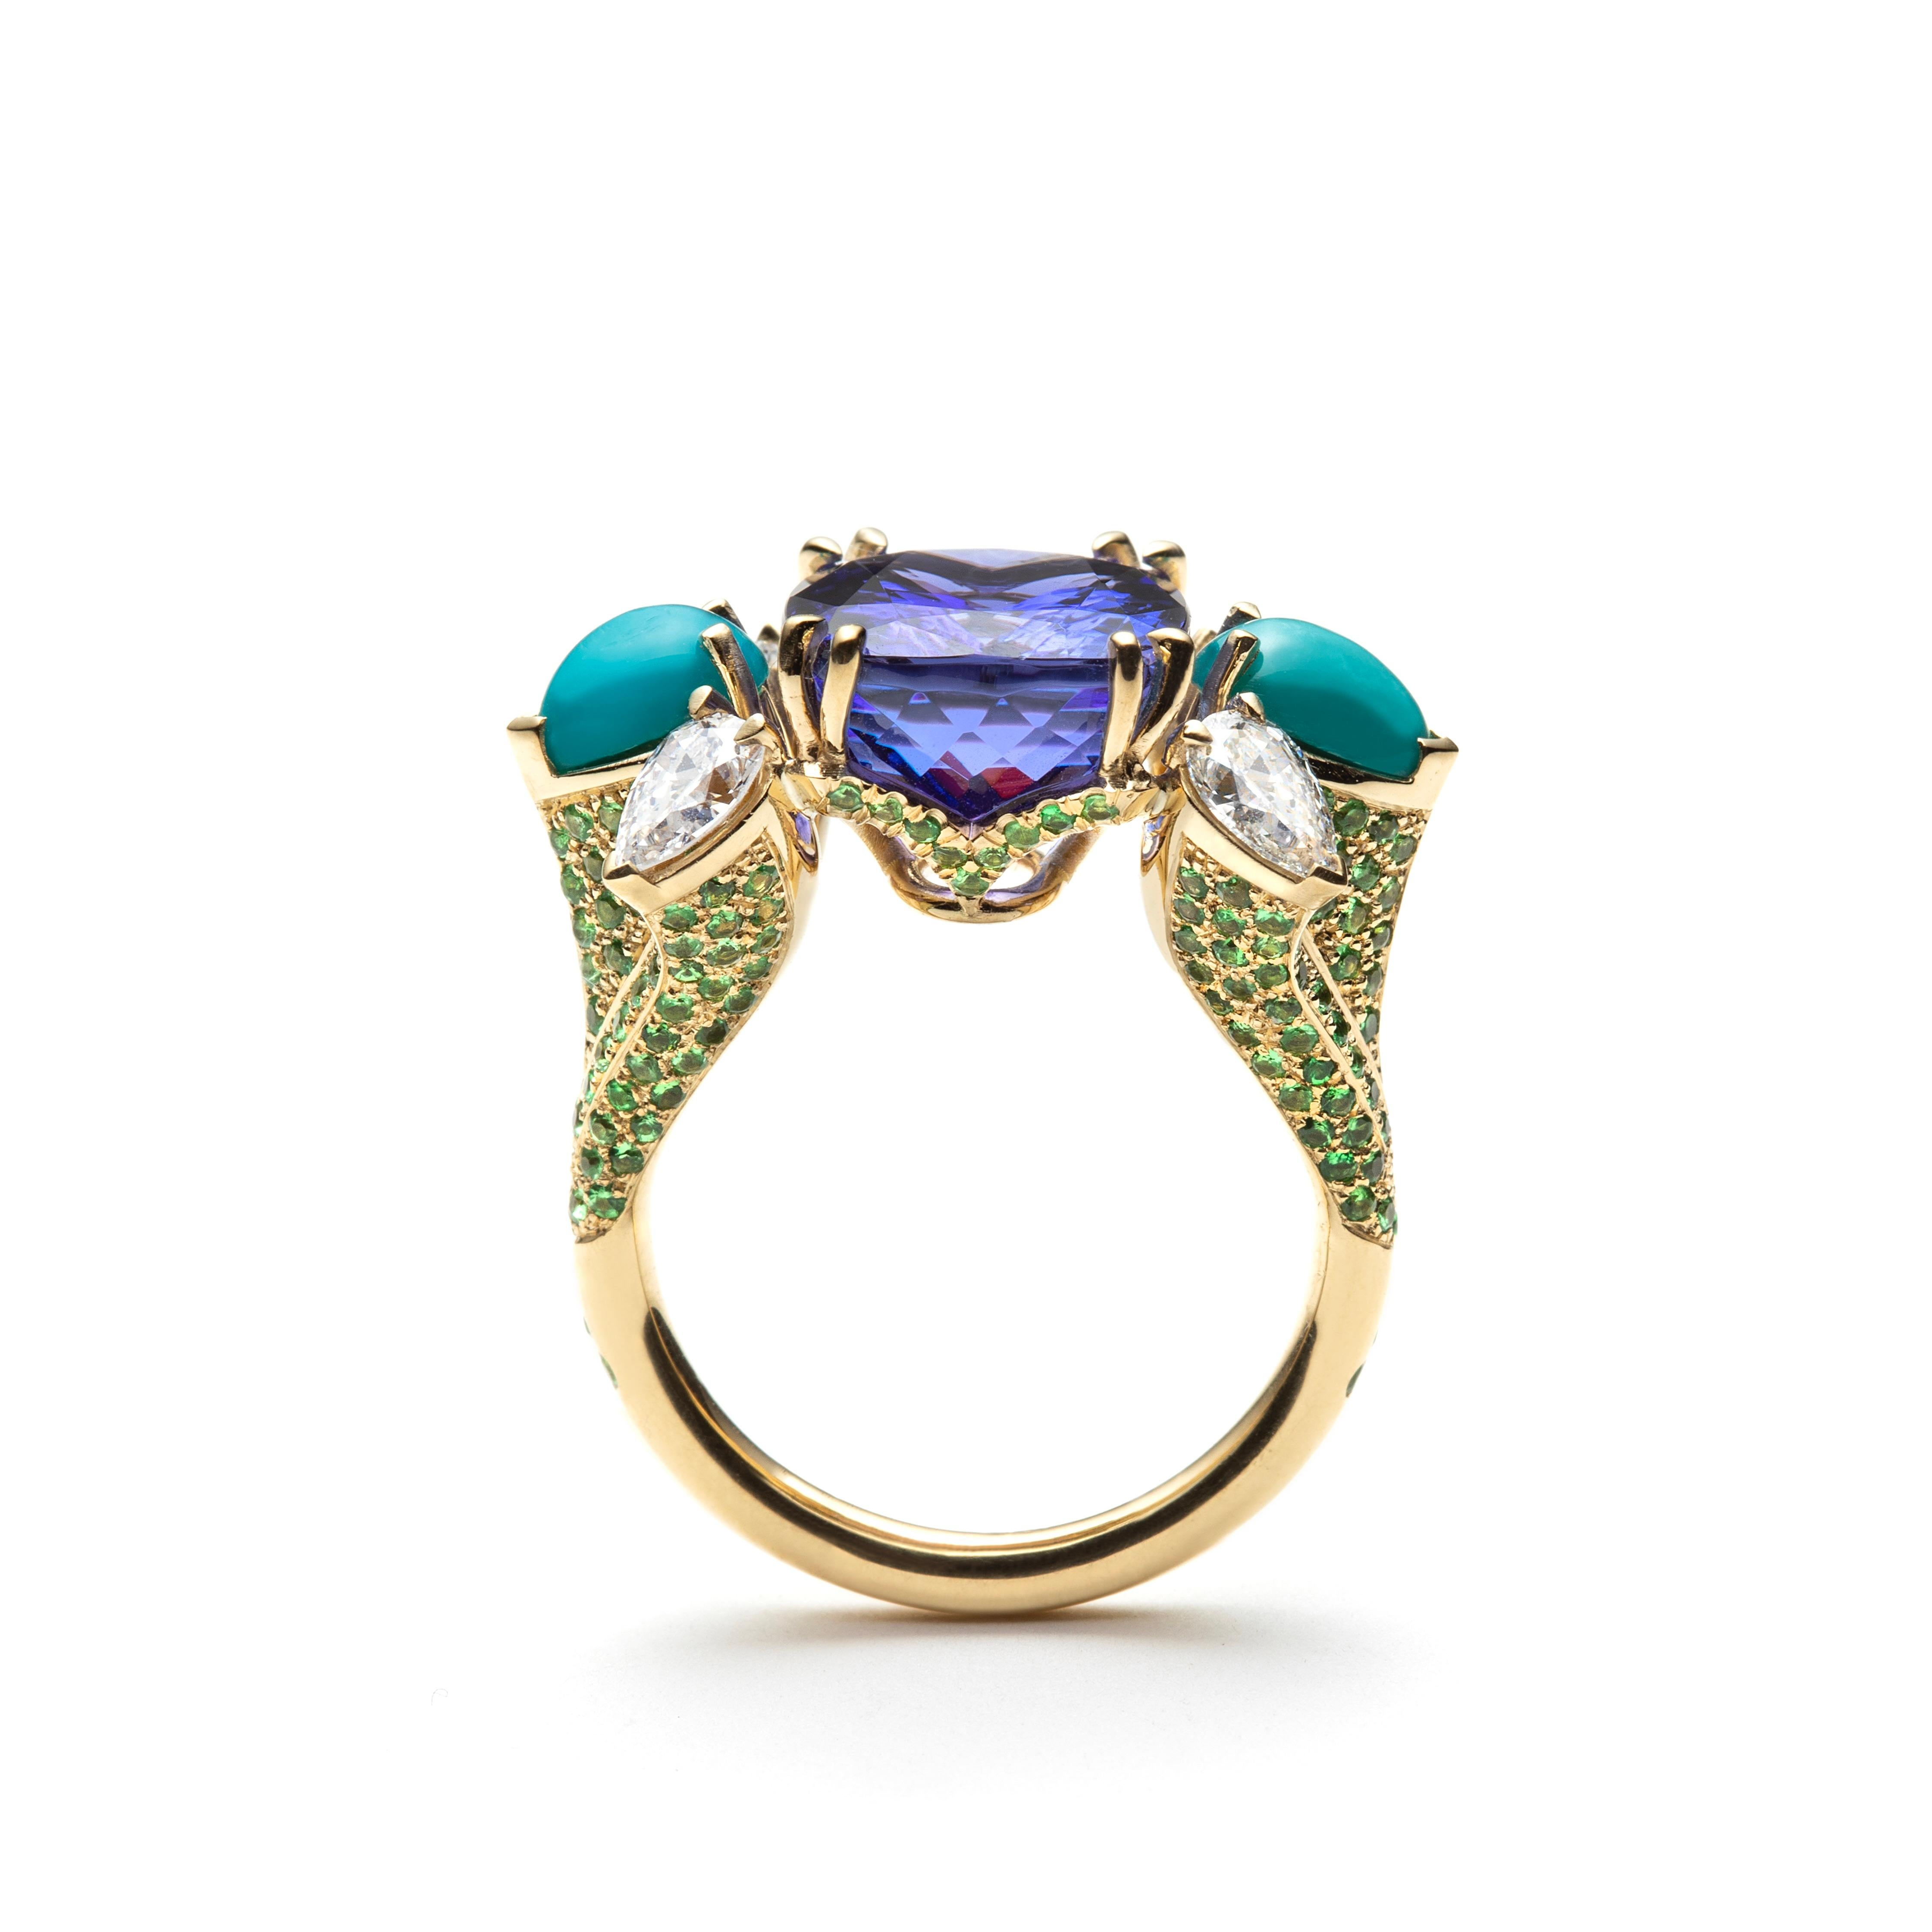 Contemporary Tanzanite, Diamond, Turquoise and Tsavorite Ring in 18K Yellow Gold by Serafino For Sale